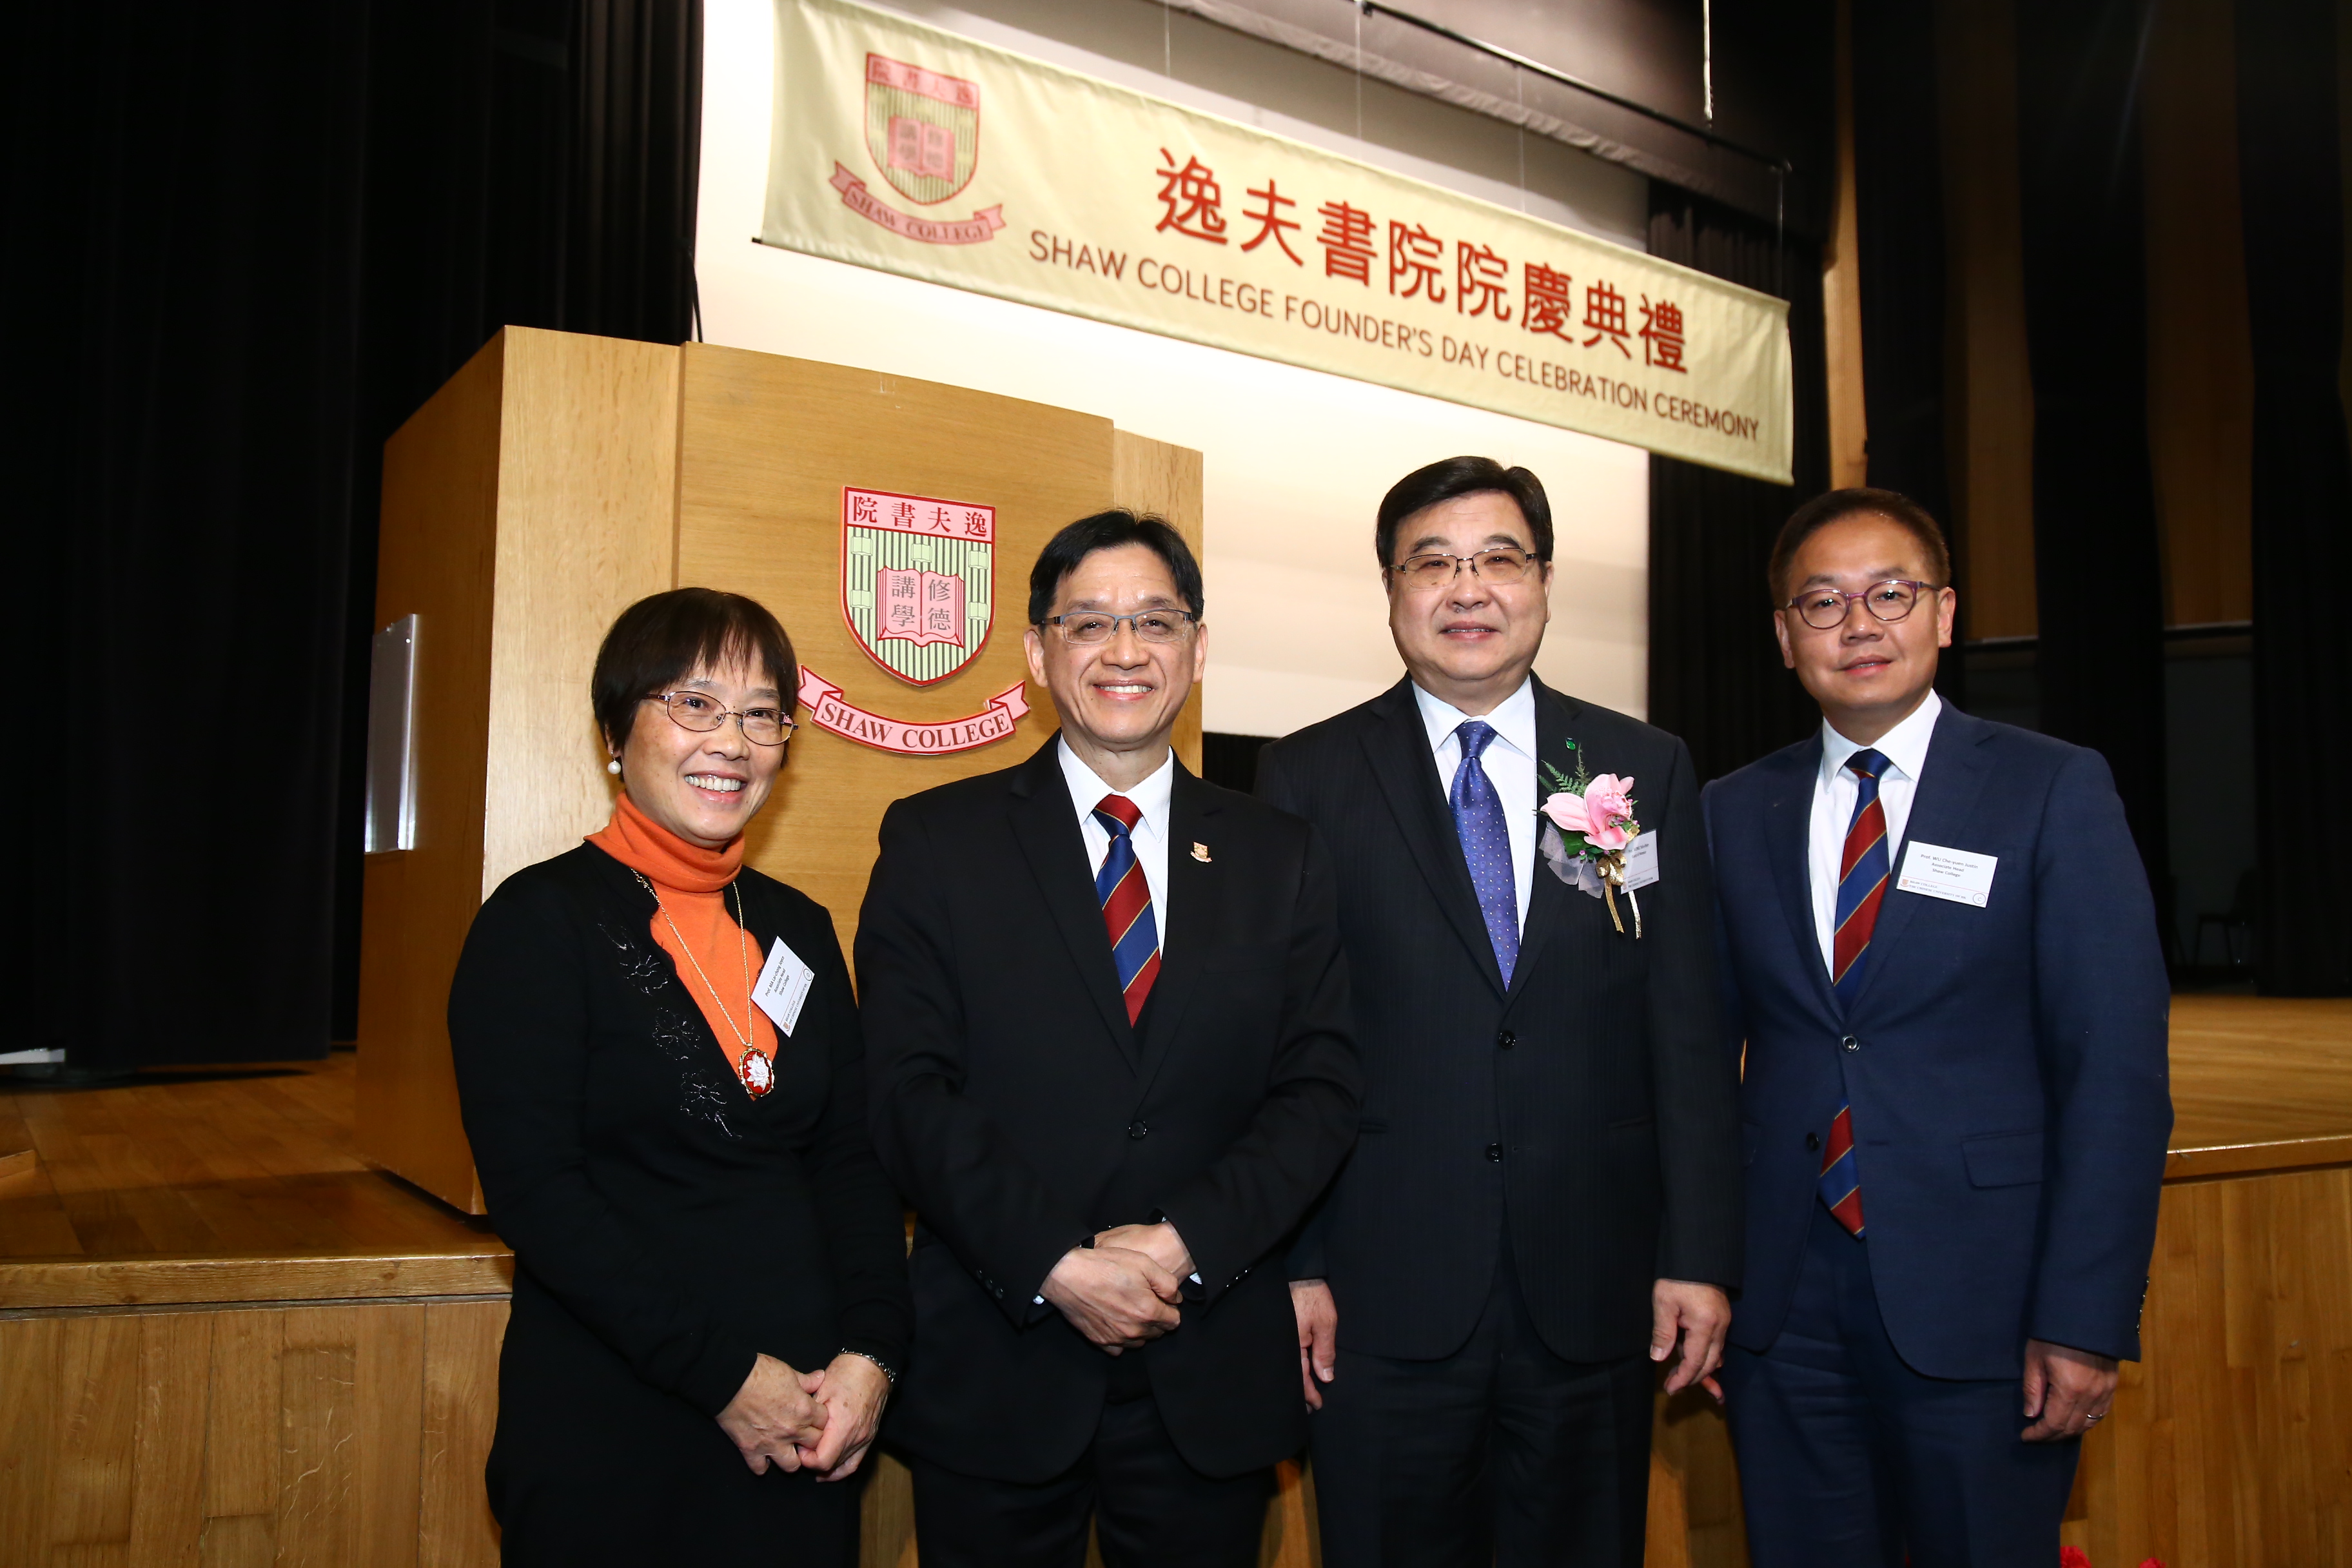 Photo of Professor Joyce Ma (first from left) with (starting from second from the left) Professor Andrew Chan, then College Head, Professor Wong Yuk-shan, Guest of Honour and Professor Justin Wu, Associate Head in the 32nd Founder's Day Ceremony